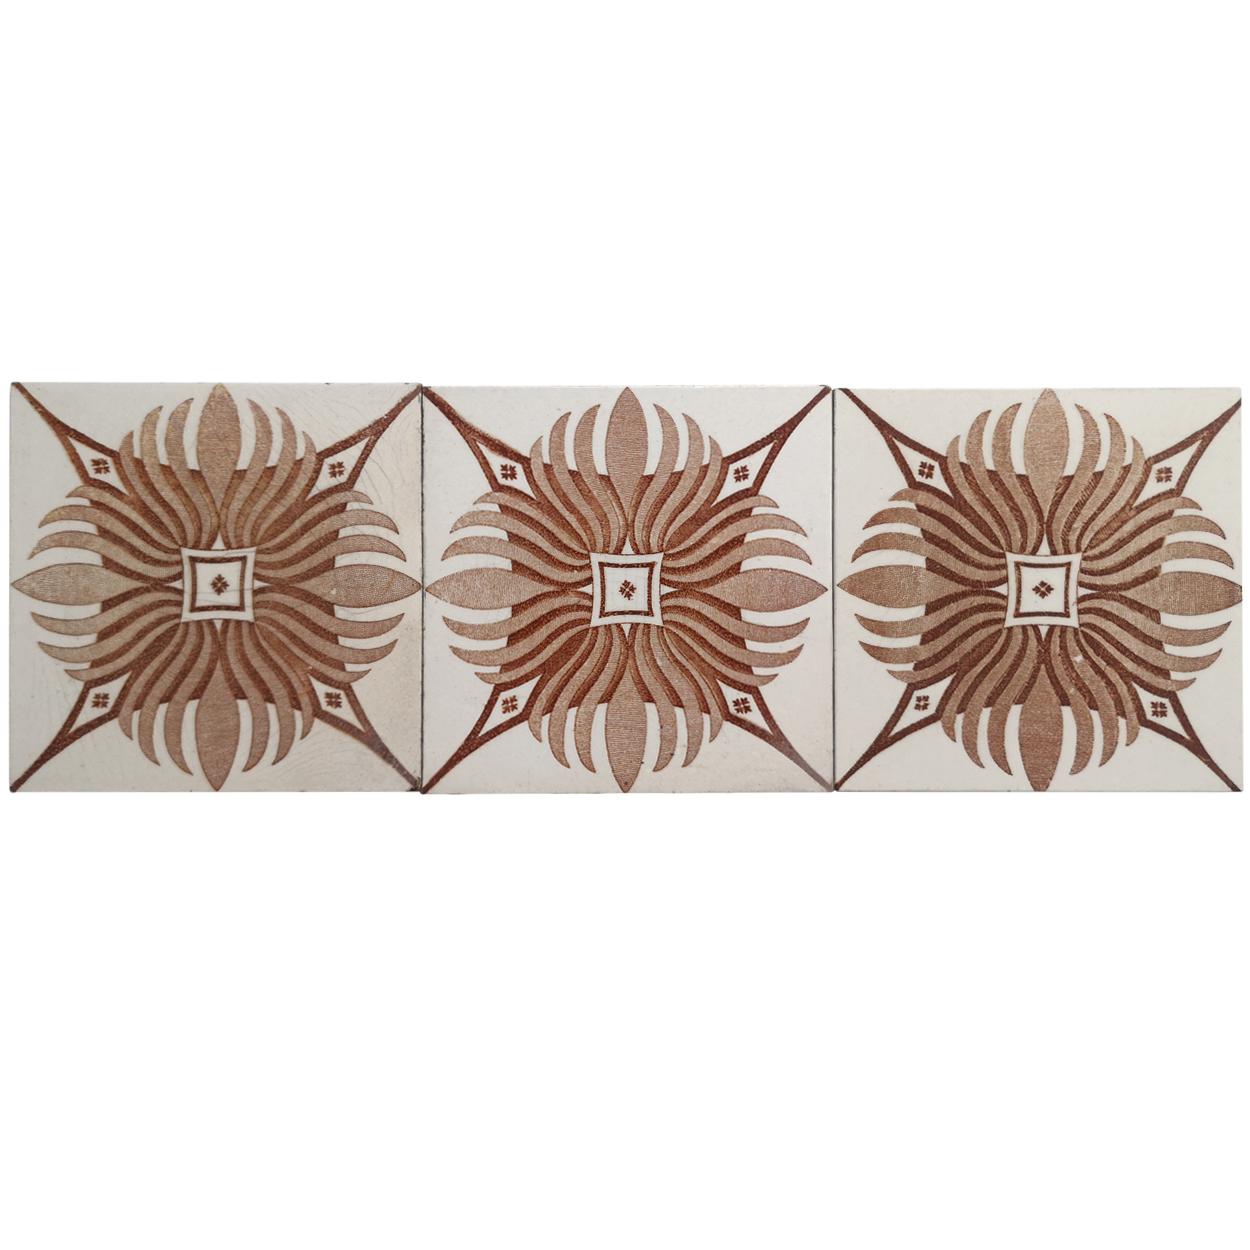 Recently lifted from its original home, a set of antique tiles from the early 20th century. With a beautiful geometric stylized design.
Manufactured by le Claive, circa 1920 

he dimensions per tile are 4.7 inch (12 cm) × 4.7 inch (12